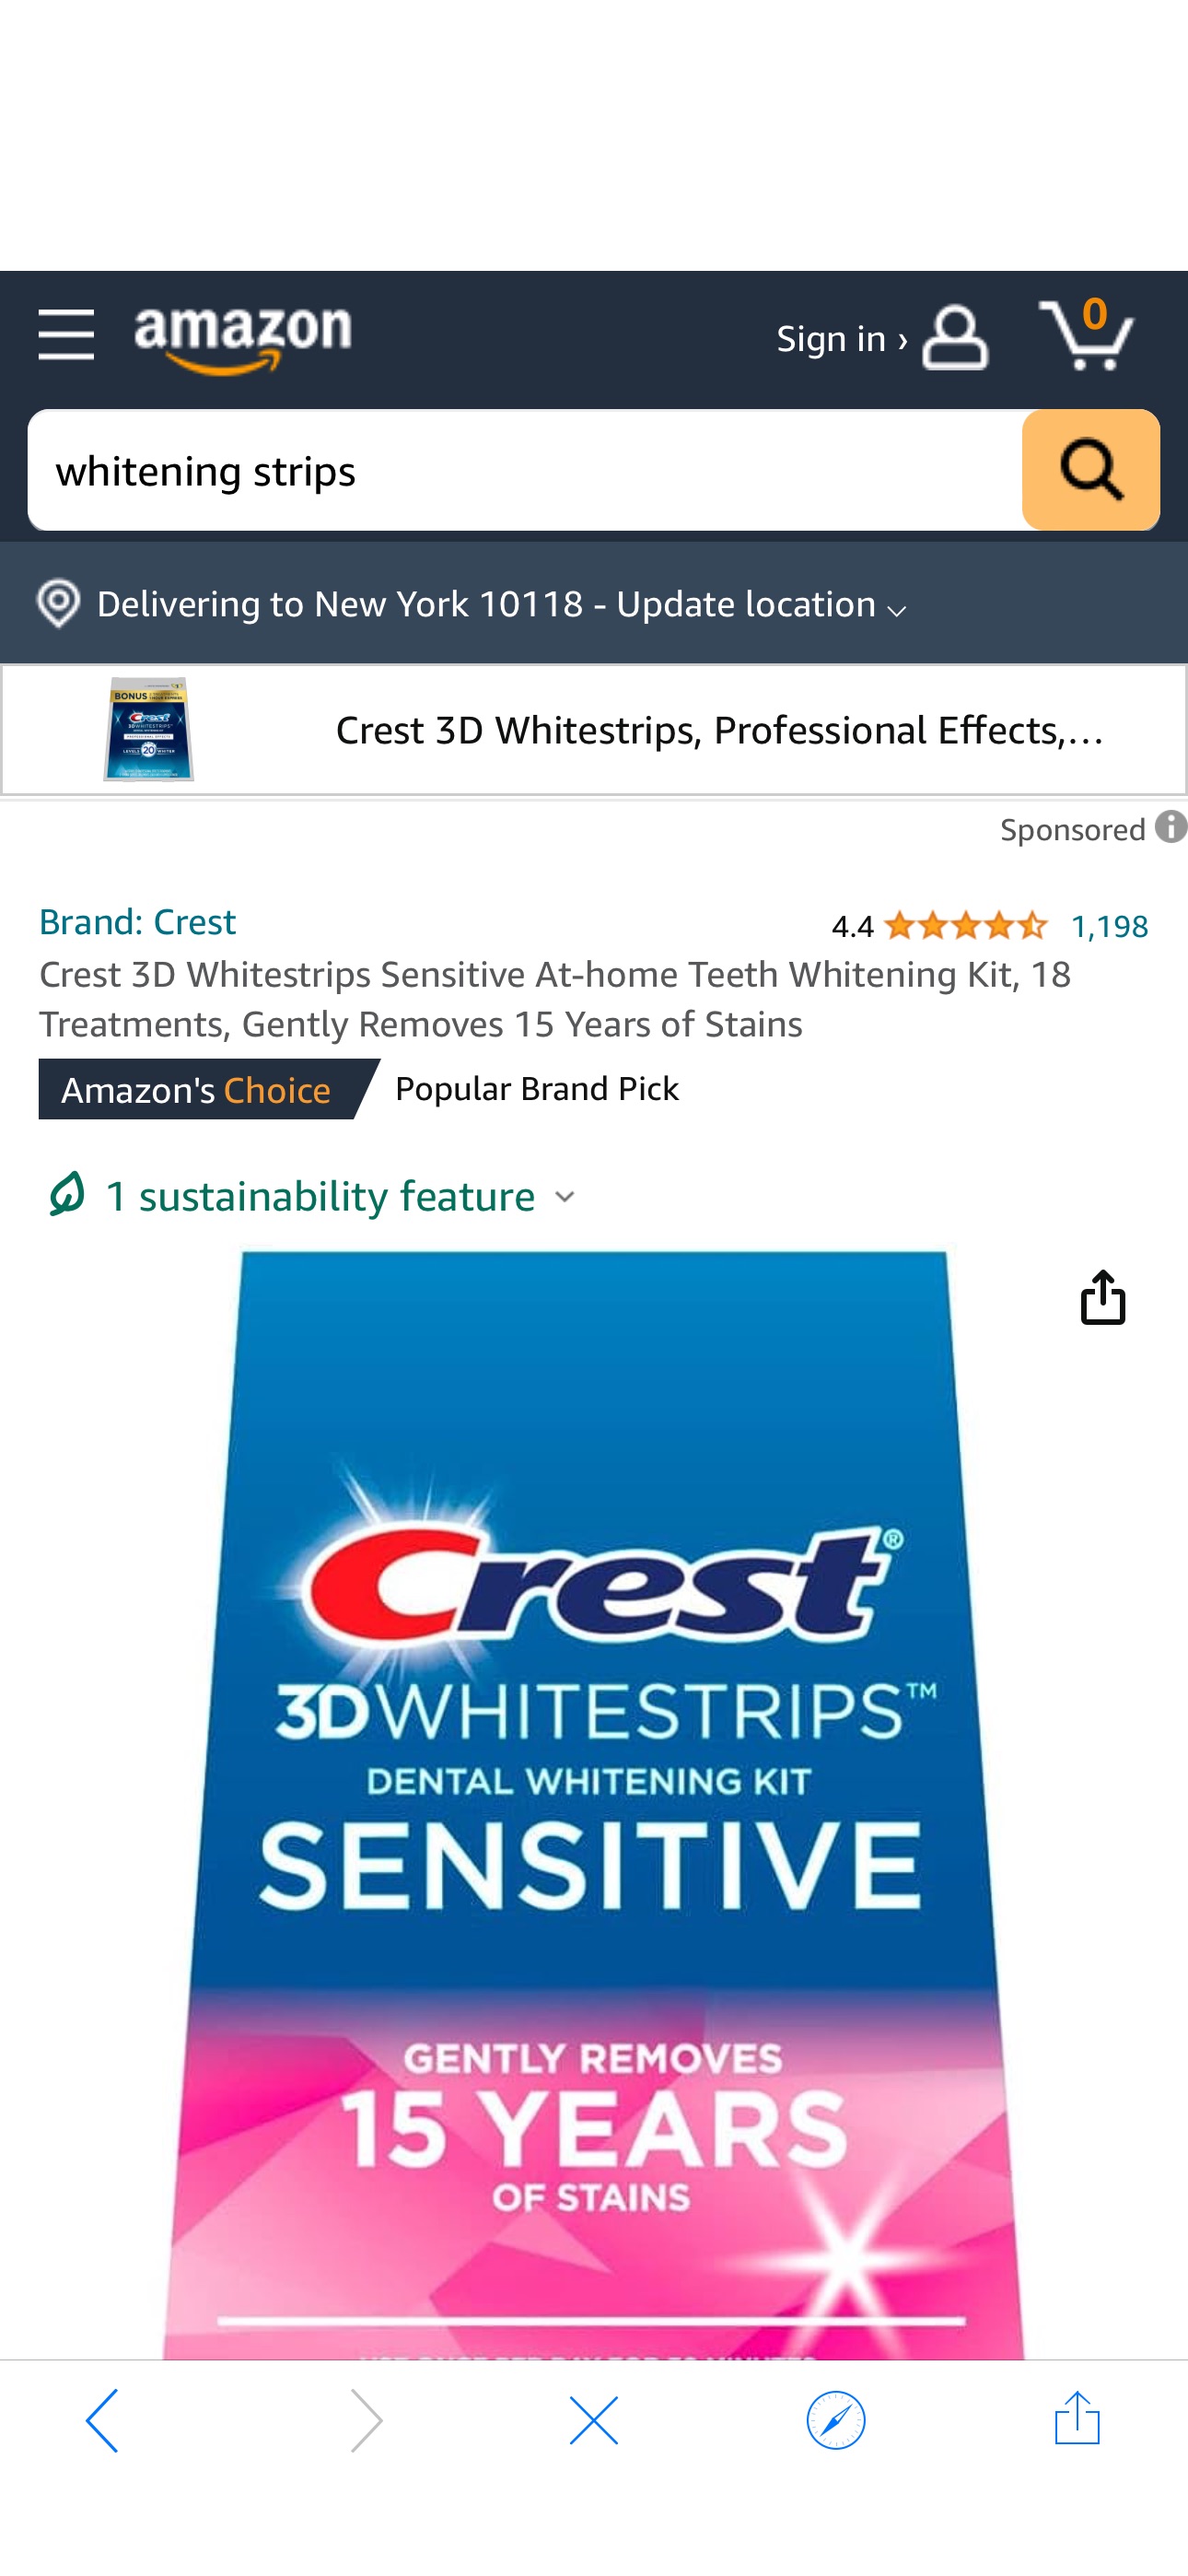 Amazon.com : Crest 3D Whitestrips Sensitive At-home Teeth Whitening Kit, 18 Treatments, Gently Removes 15 Years of Stains : Health & Household